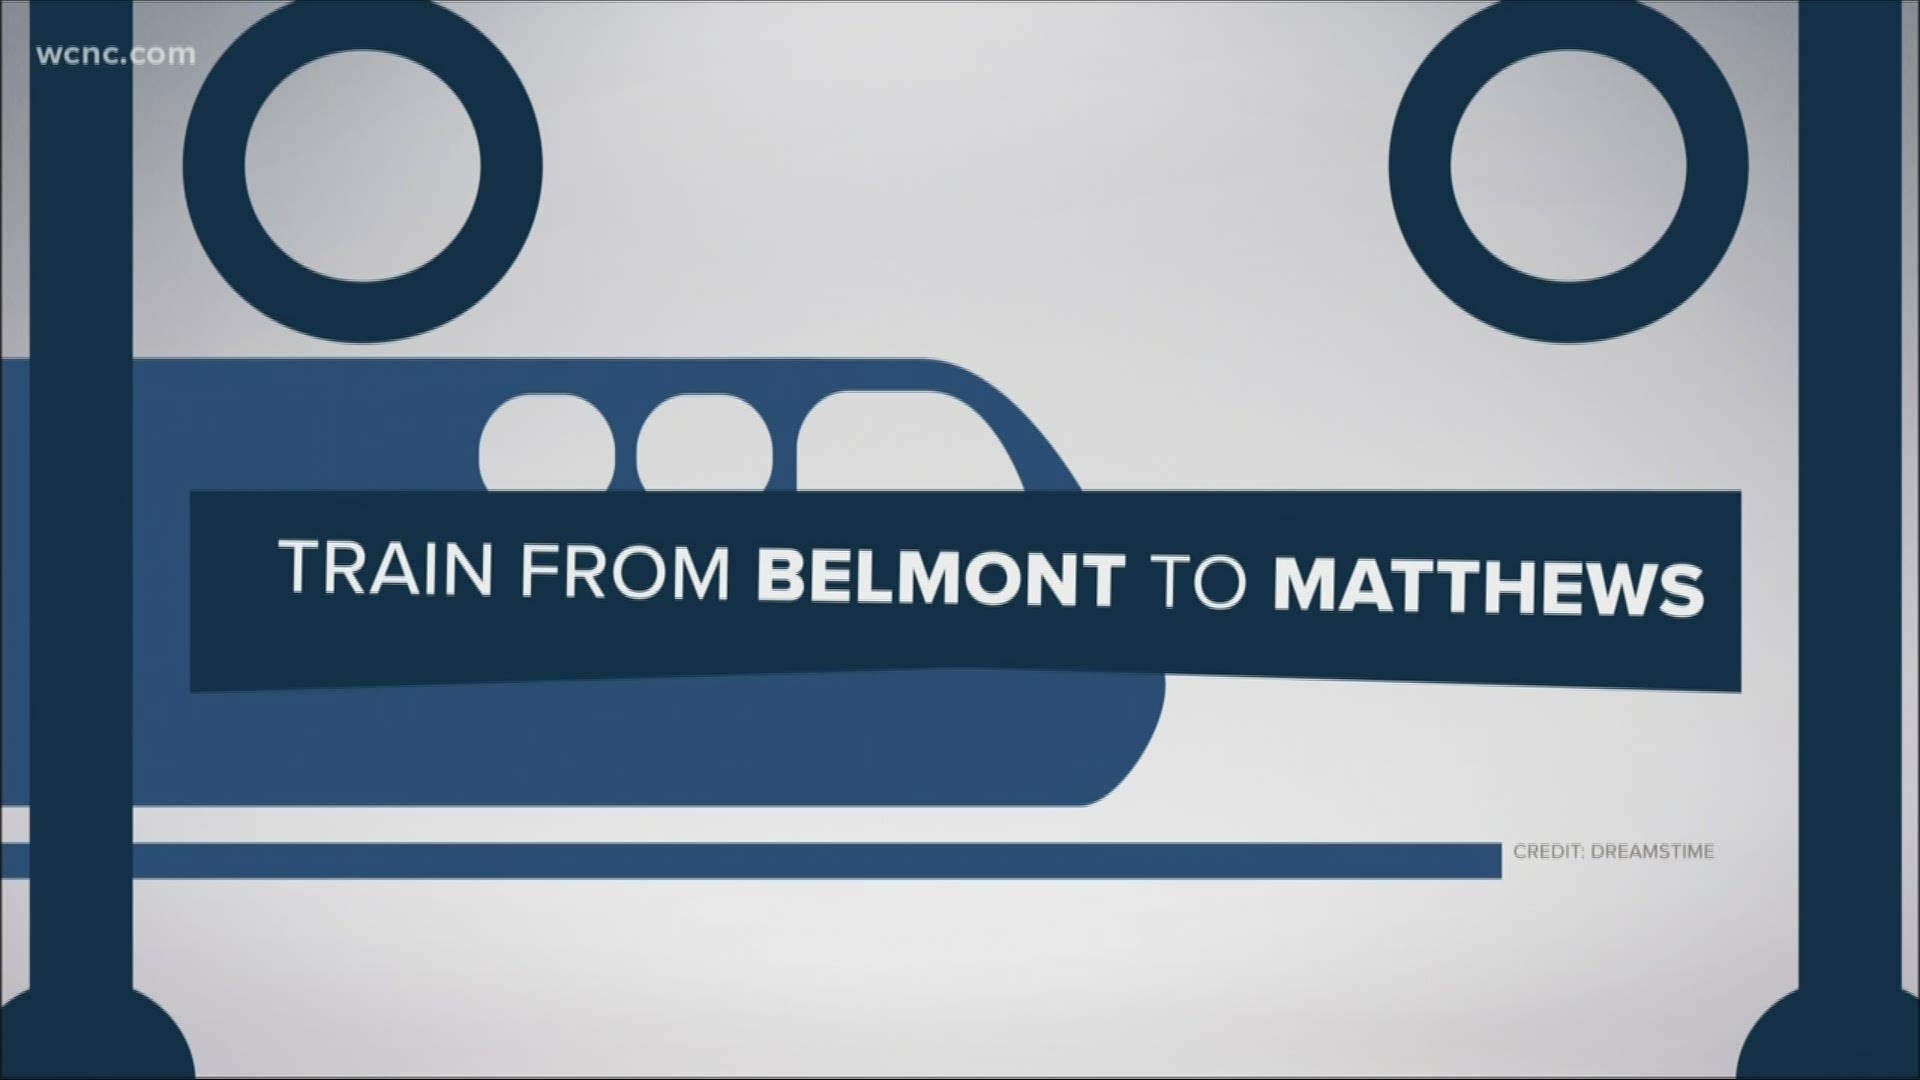 The massive project involves a train that would start in Belmont and end in Matthews.